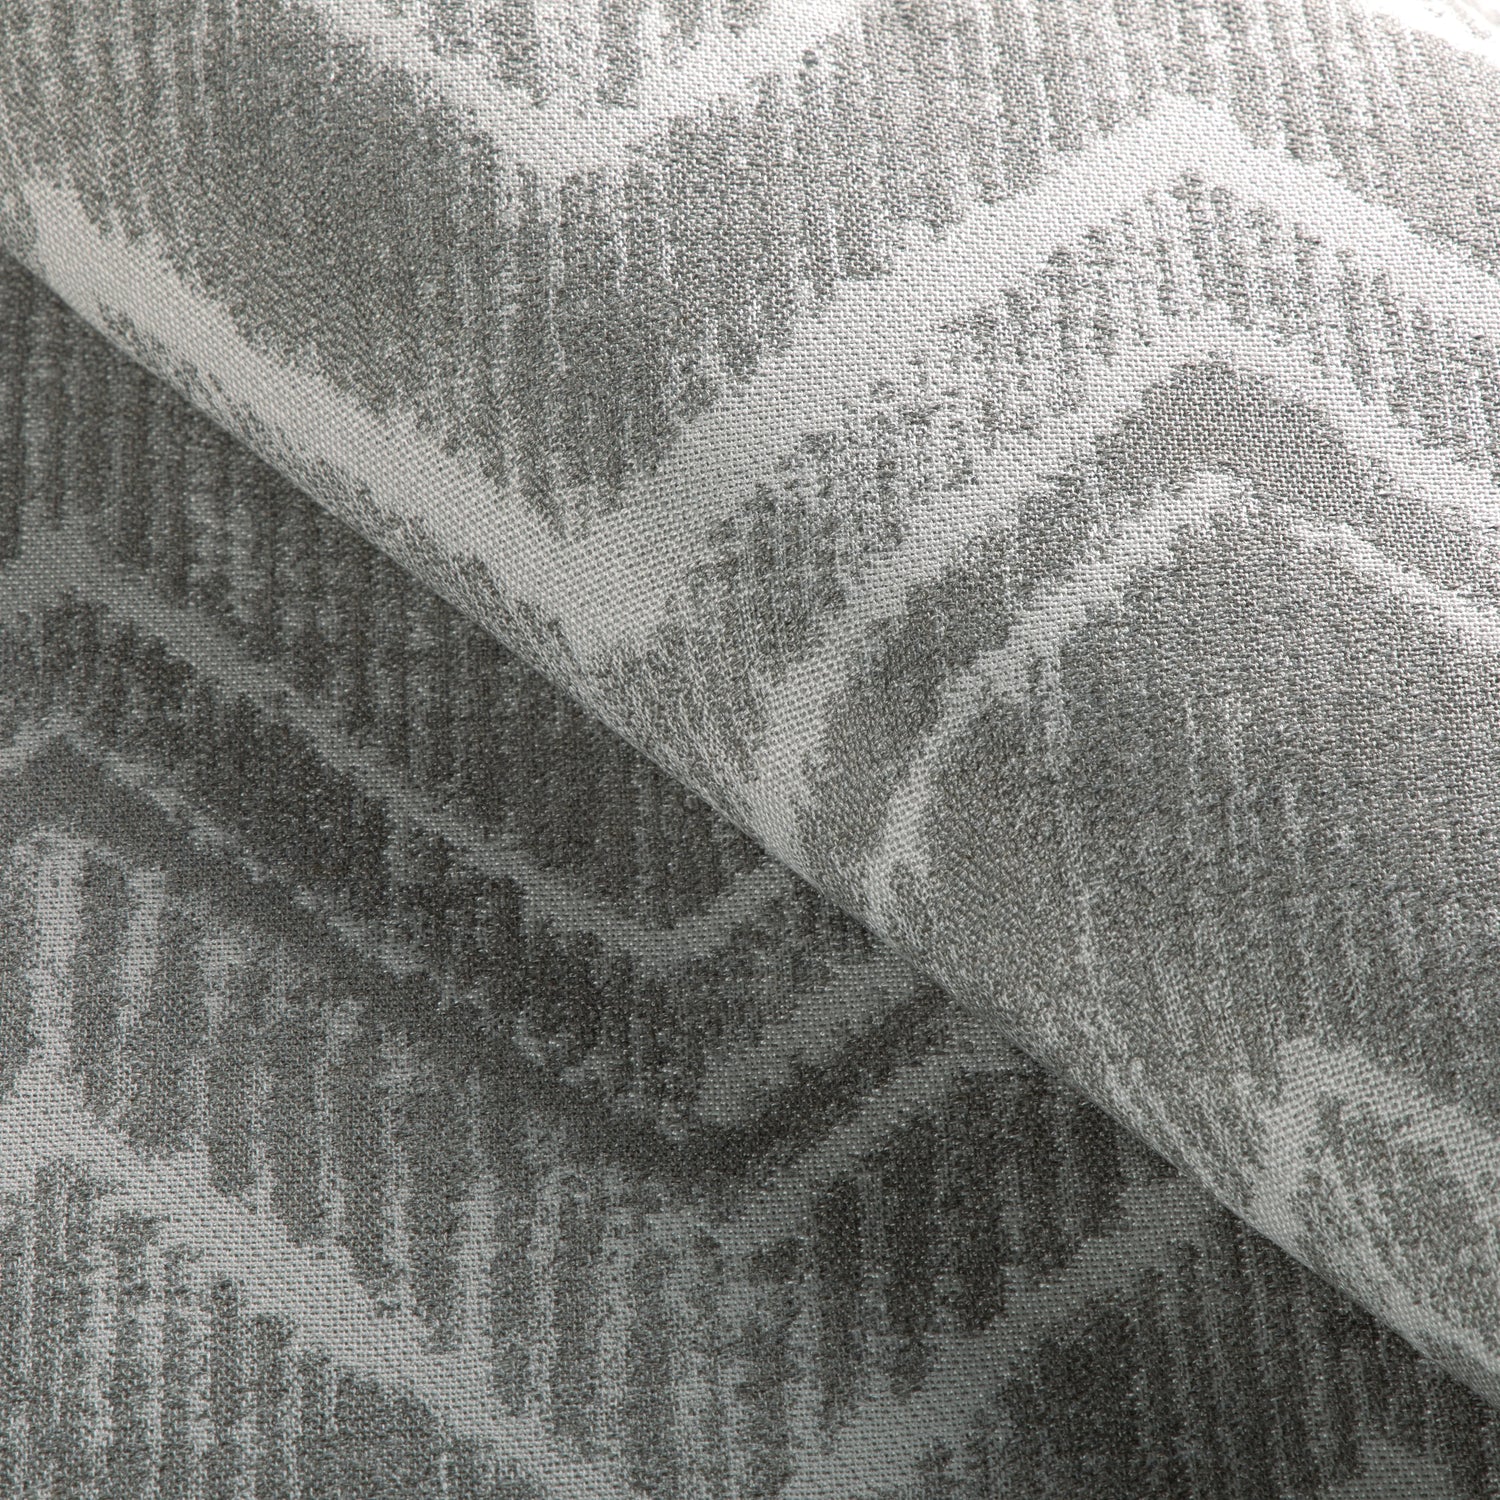 Alternate view of Riviera Batik fabric in driftwood color - pattern 36934.11.0 - by Kravet Couture in the Riviera collection